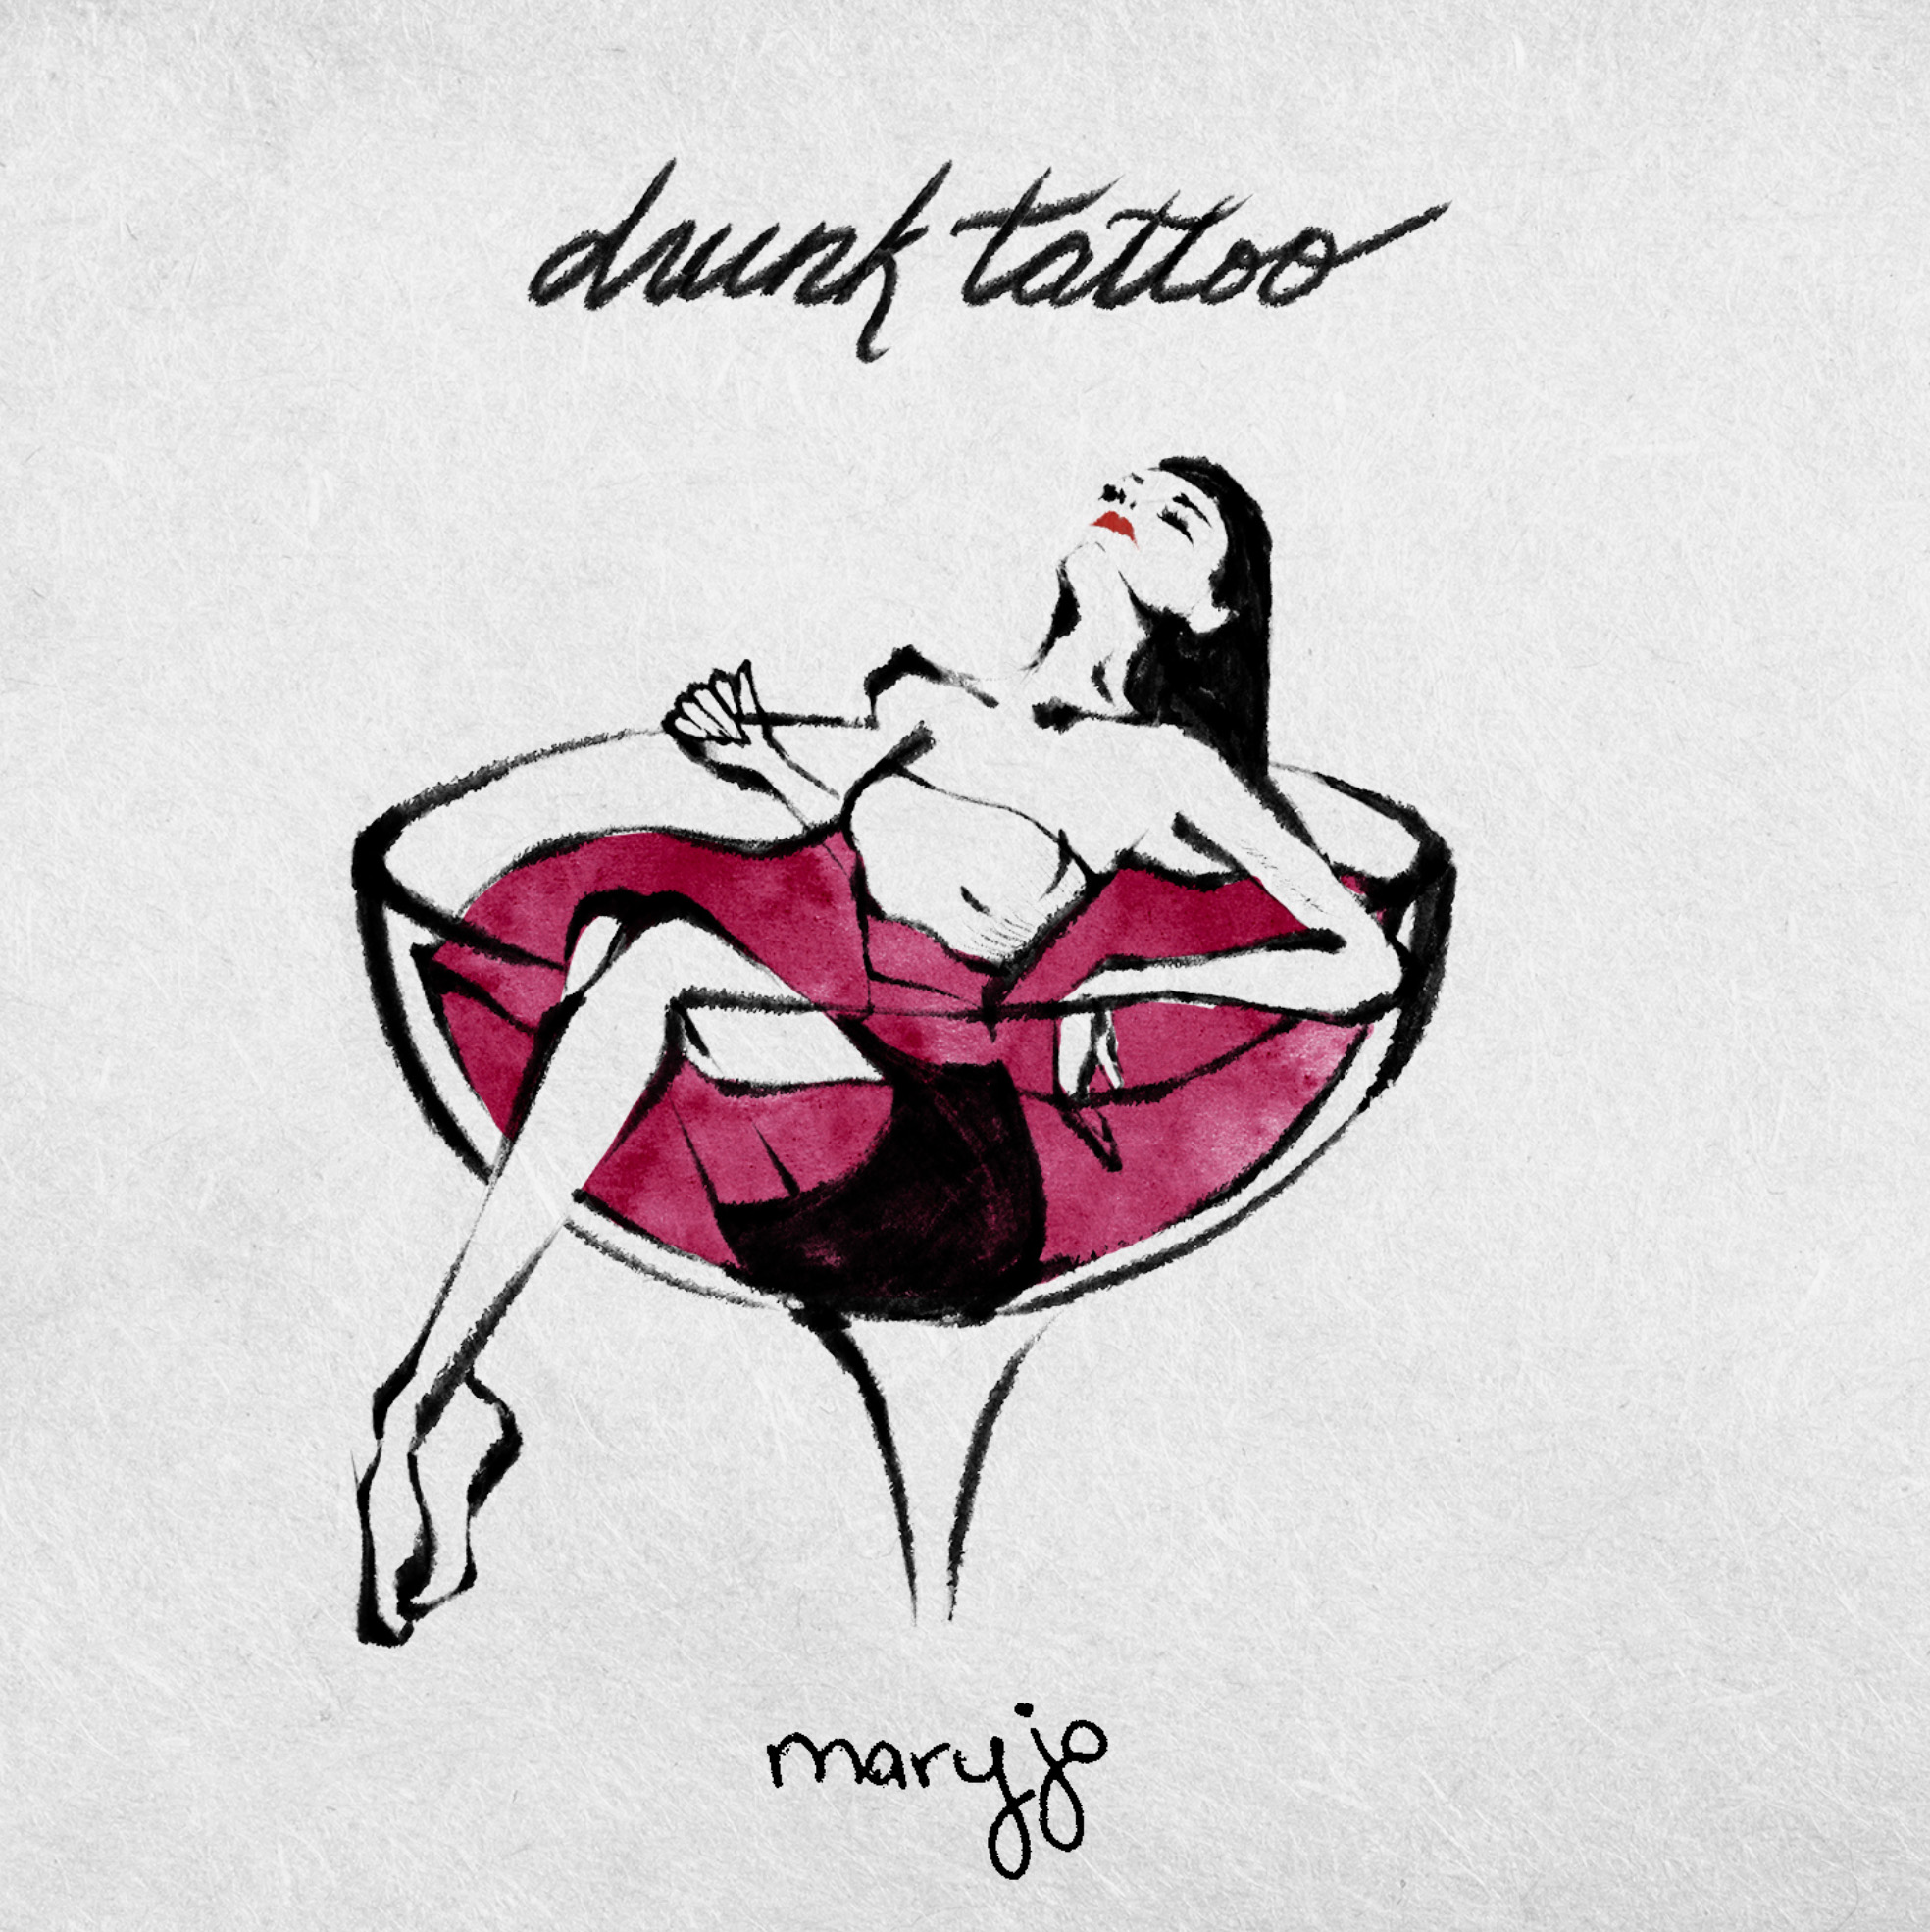 The cover art for Drunk Tattoo: a drawn figure sits in a wine glass.